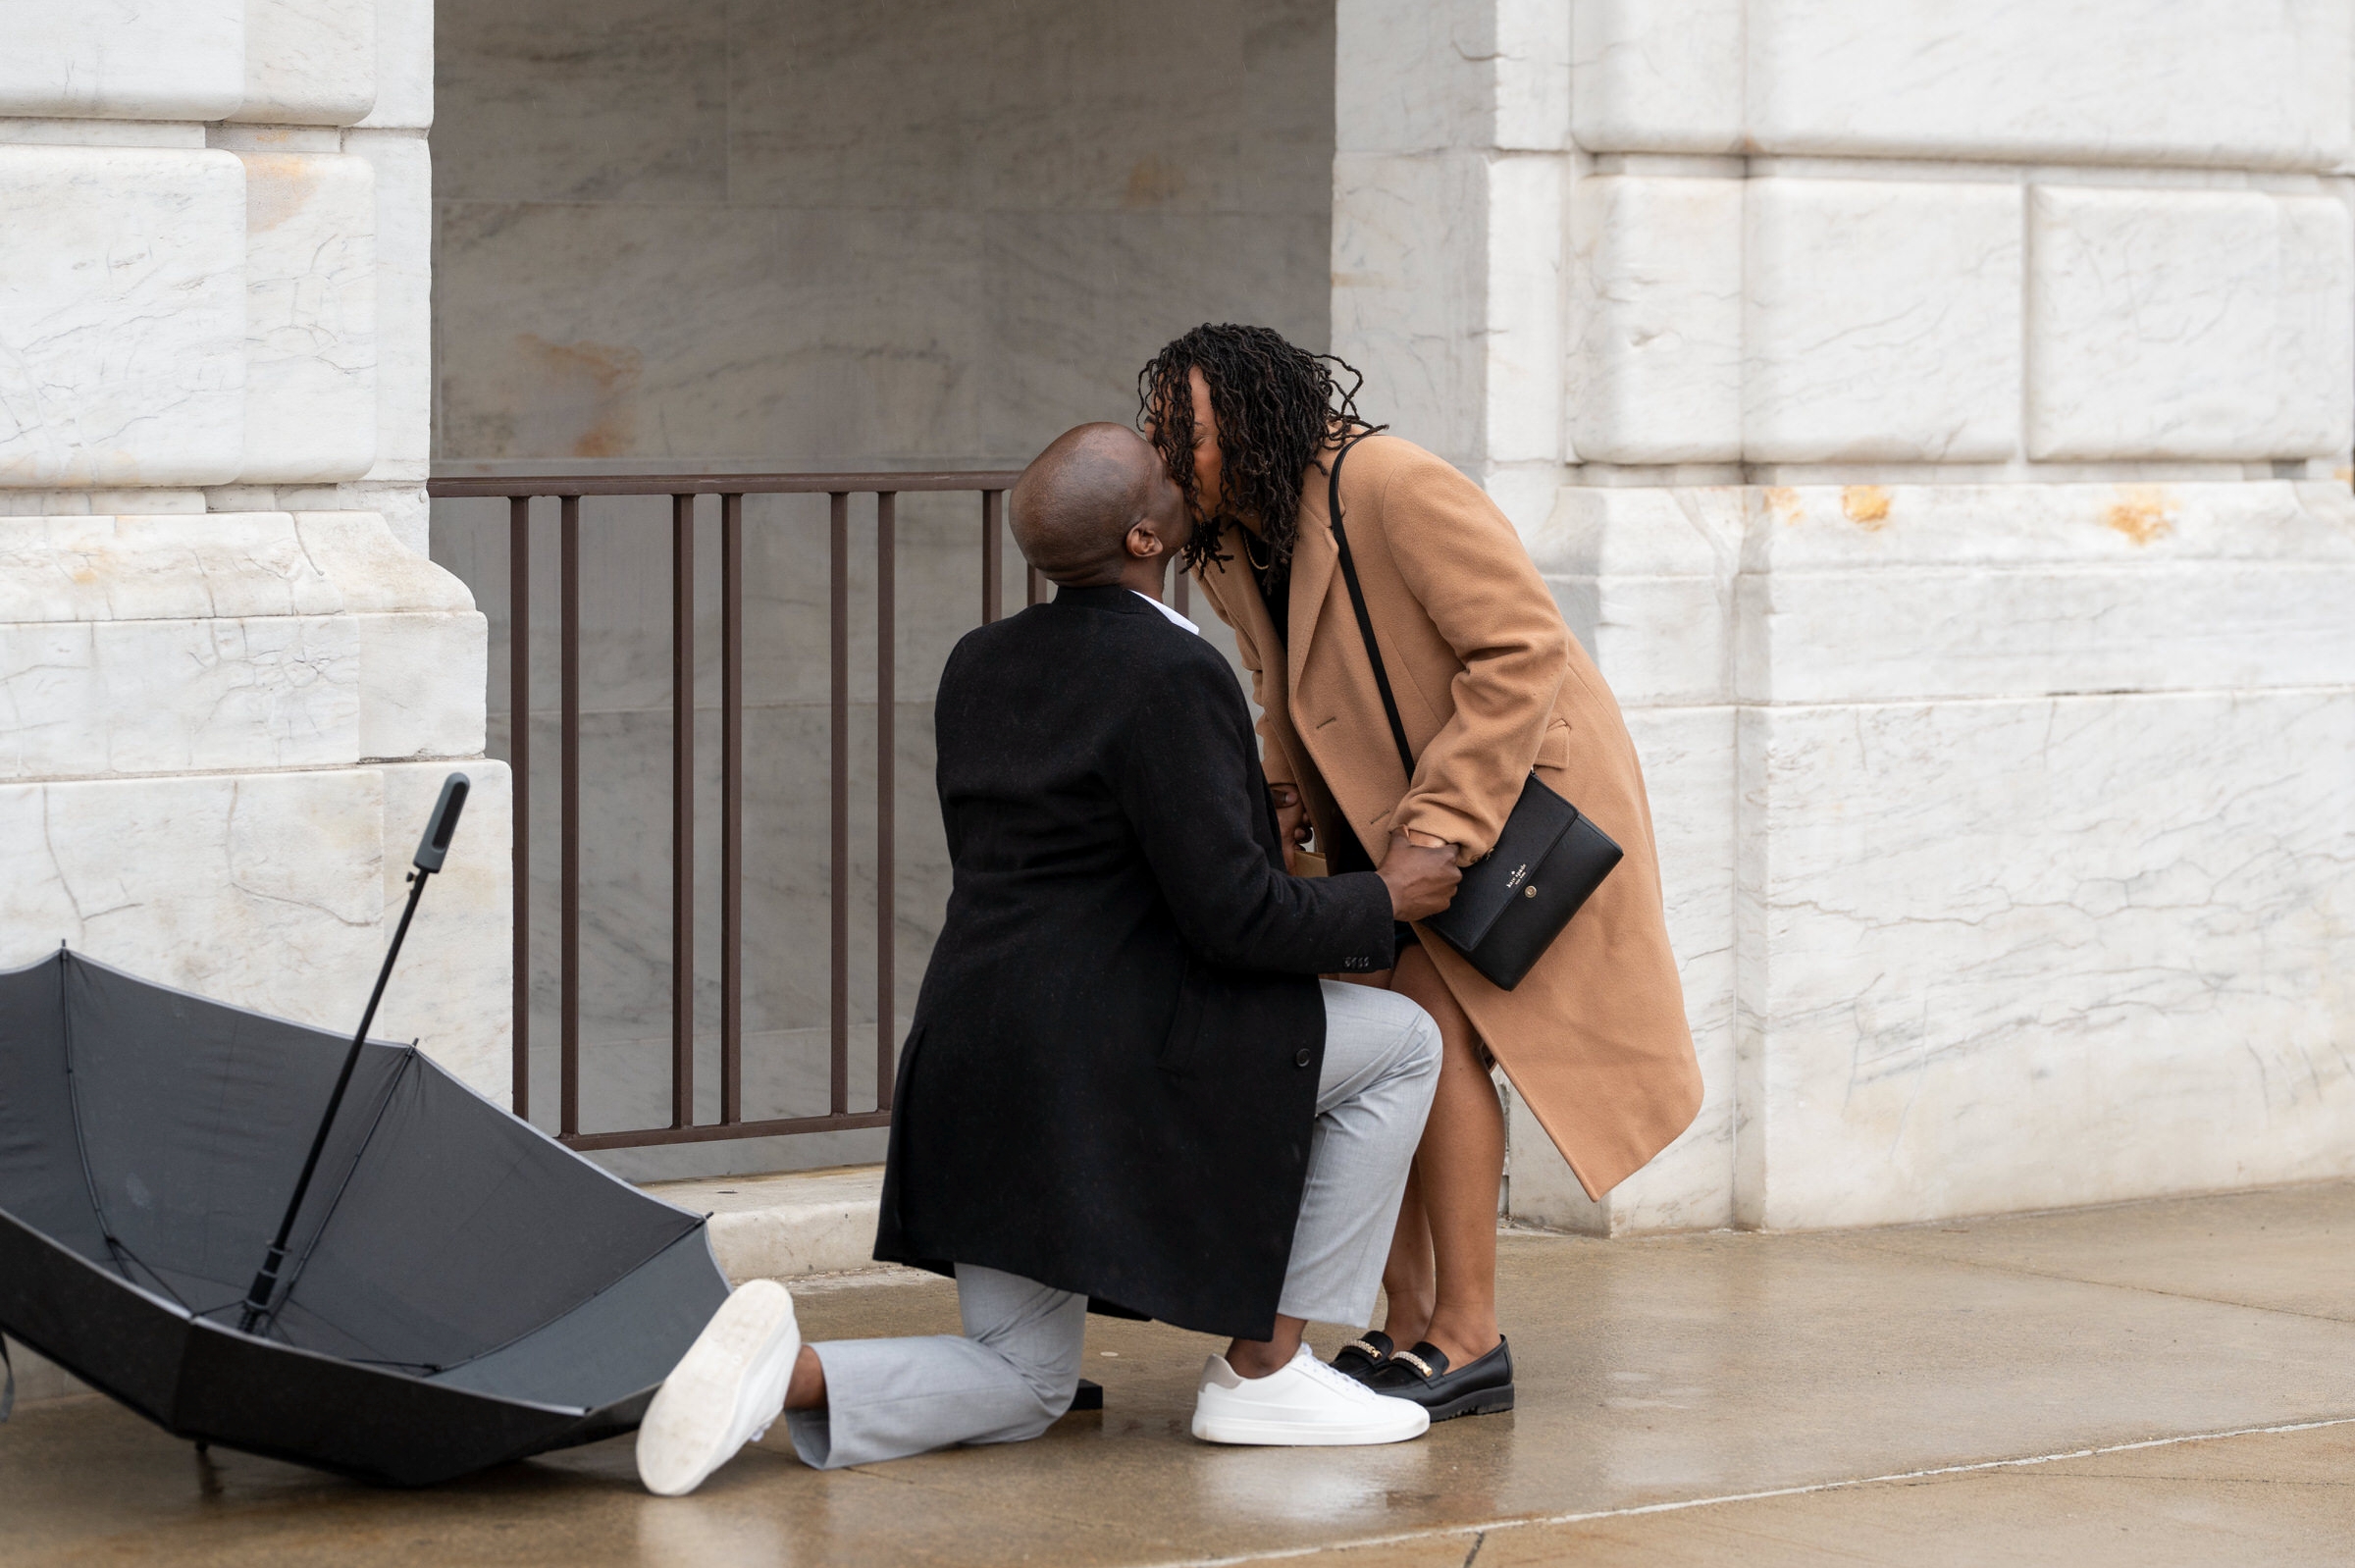 A couple kisses during a marriage proposal at the DIA in the rain.  